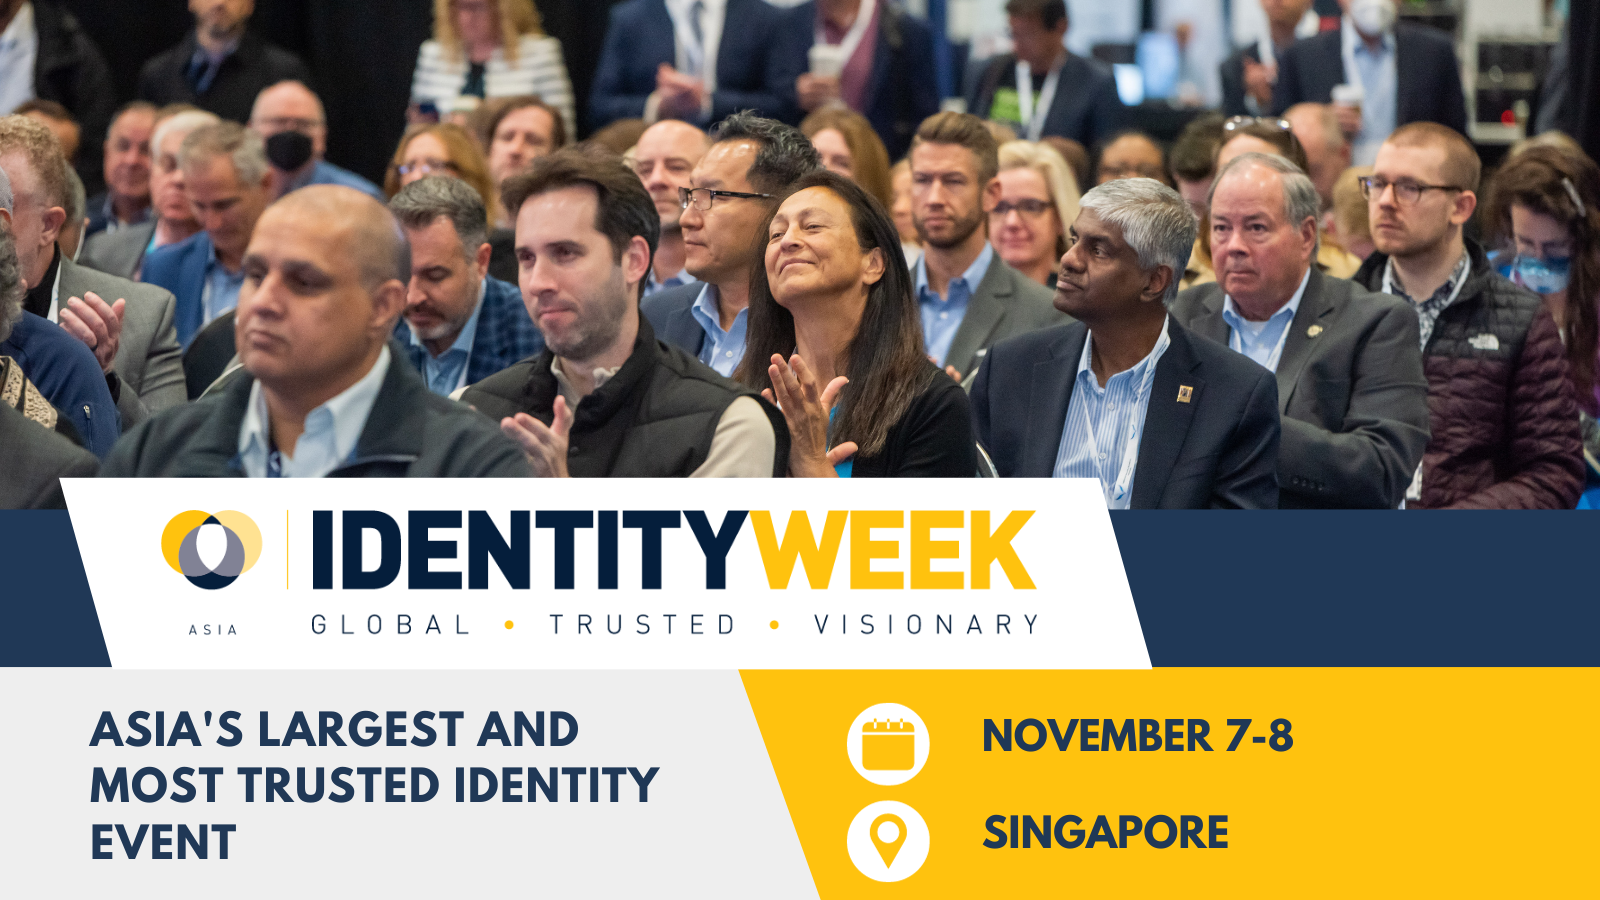 Identity Week Asia is back for 2023, and it promises to offer unmissable networking for identity leading professionals and organisations across the APAC region. This premier event will take place from 7- 8 November at the Suntec Convention Centre in Singapore, showcasing the latest innovations, trends and best practices in the world of identity to 2,500+ members of the community.